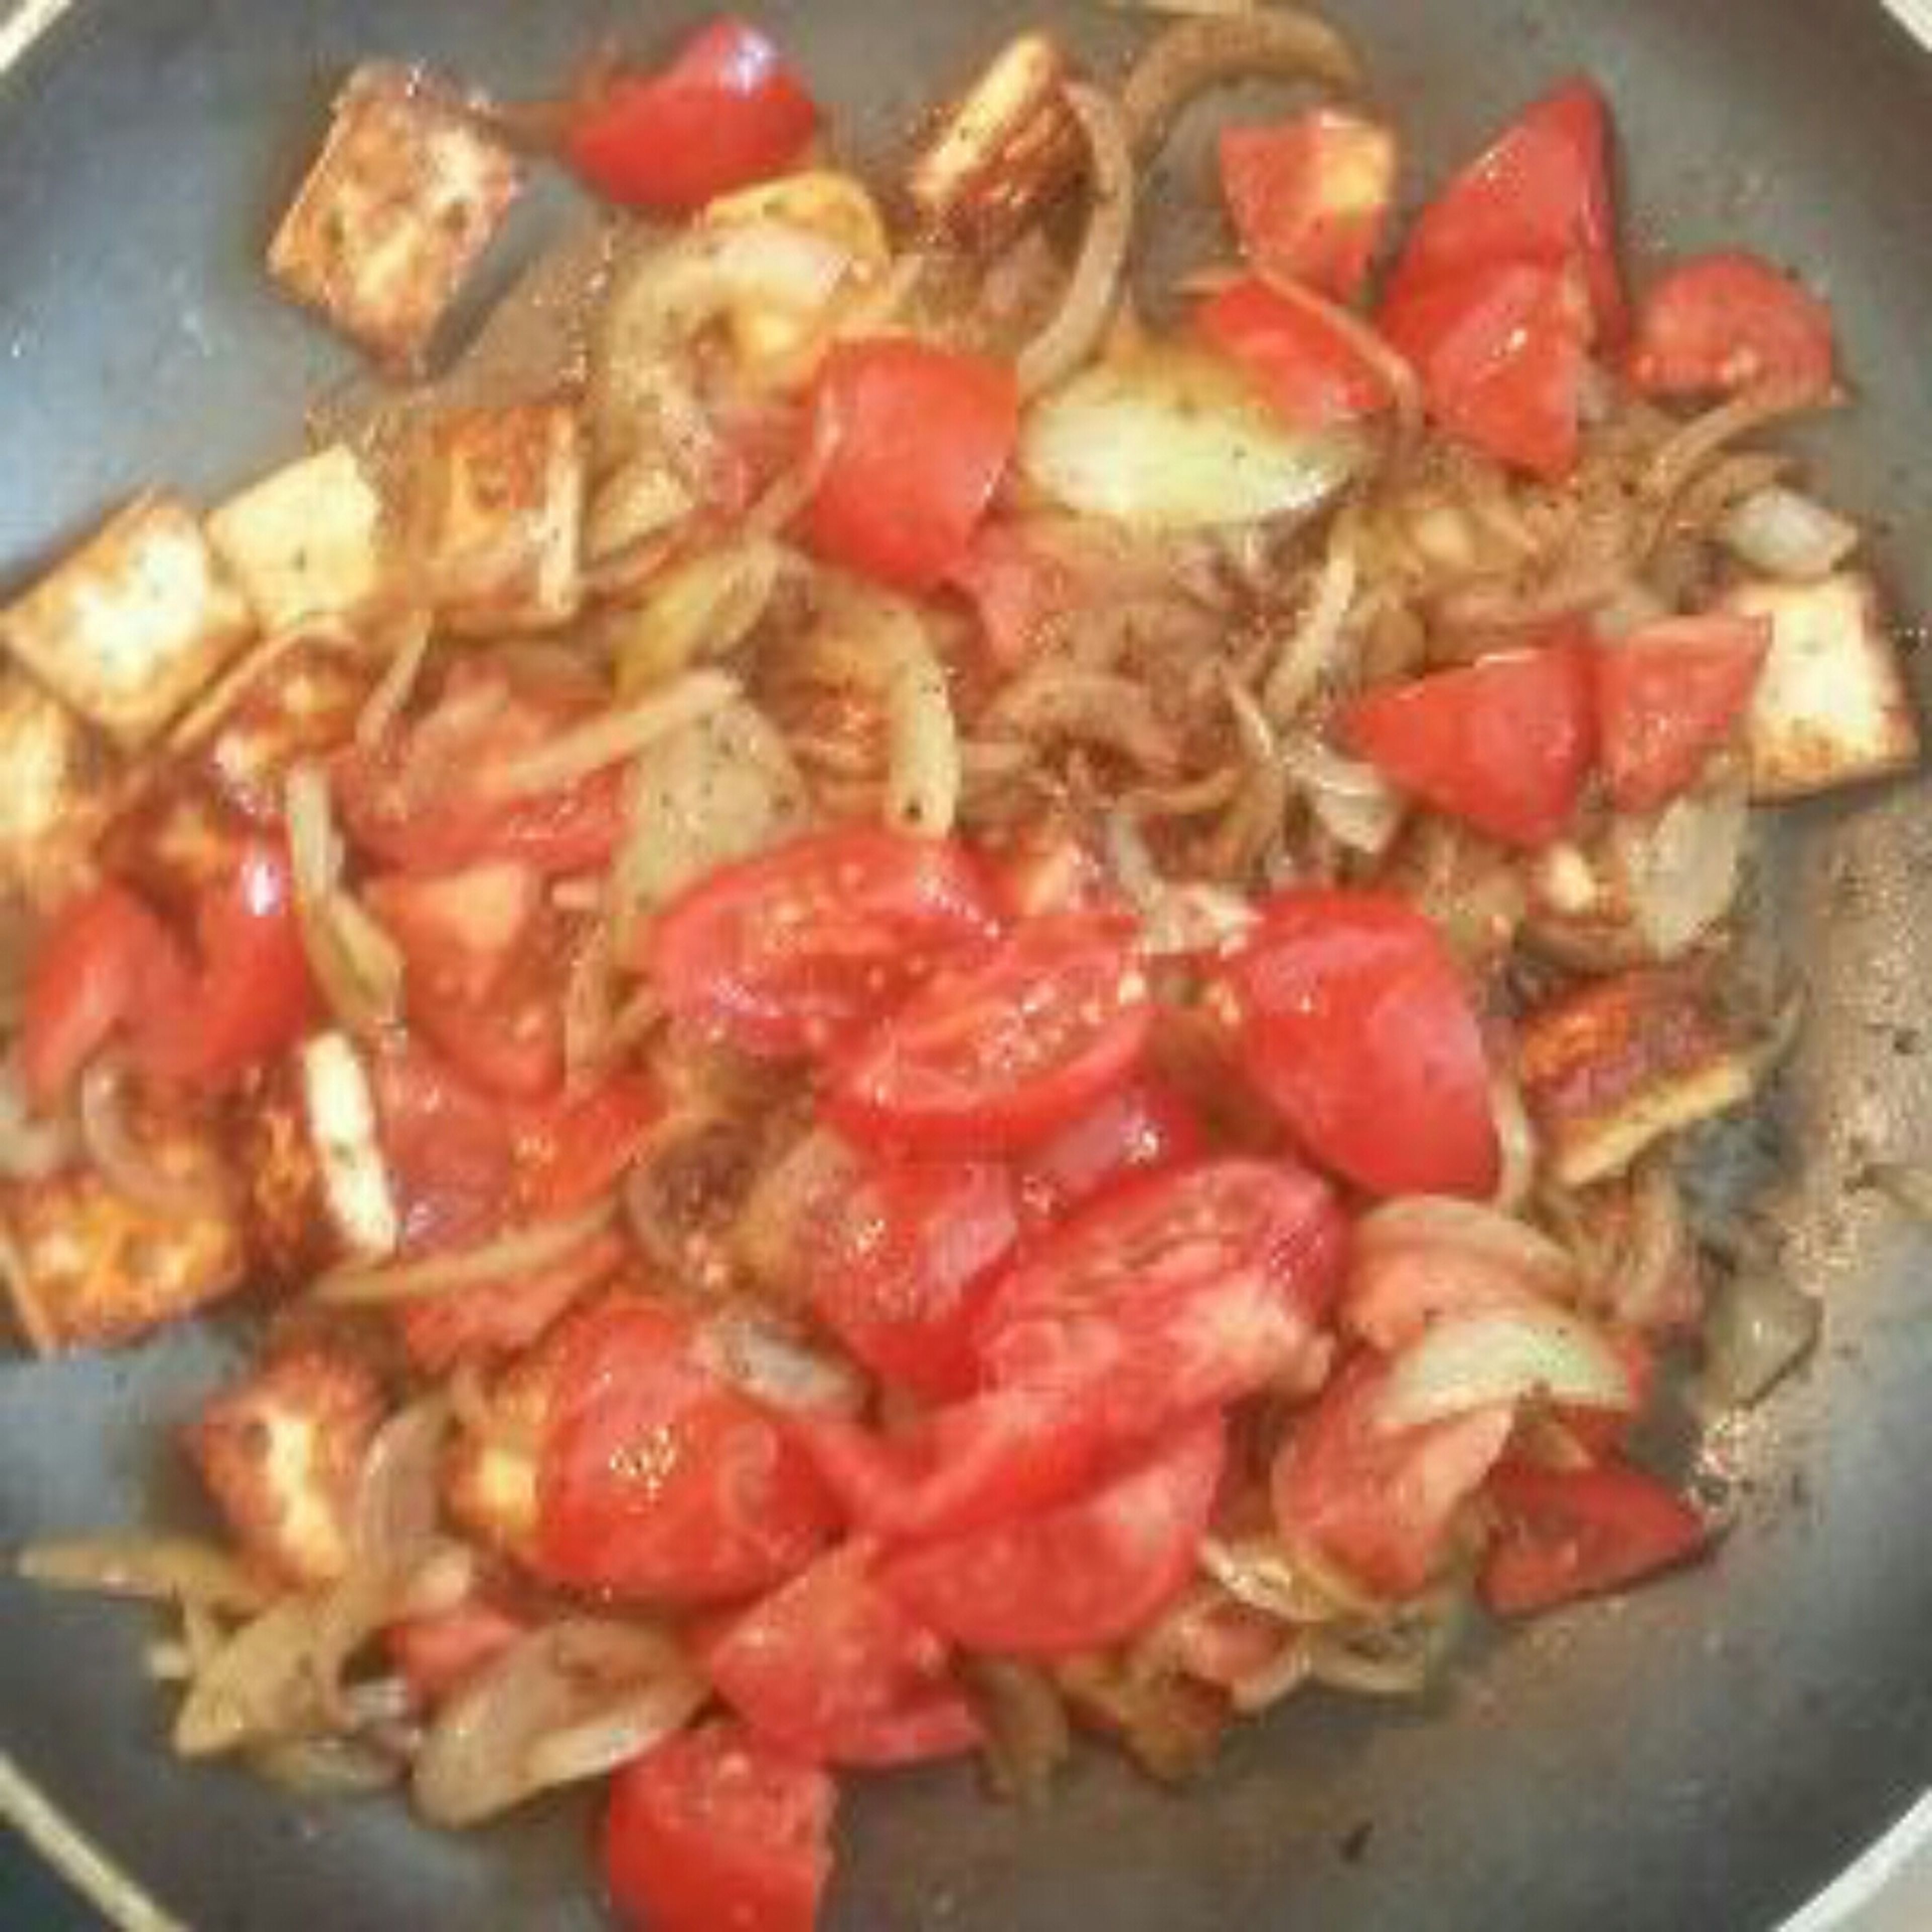 add all the chopped tomatoes